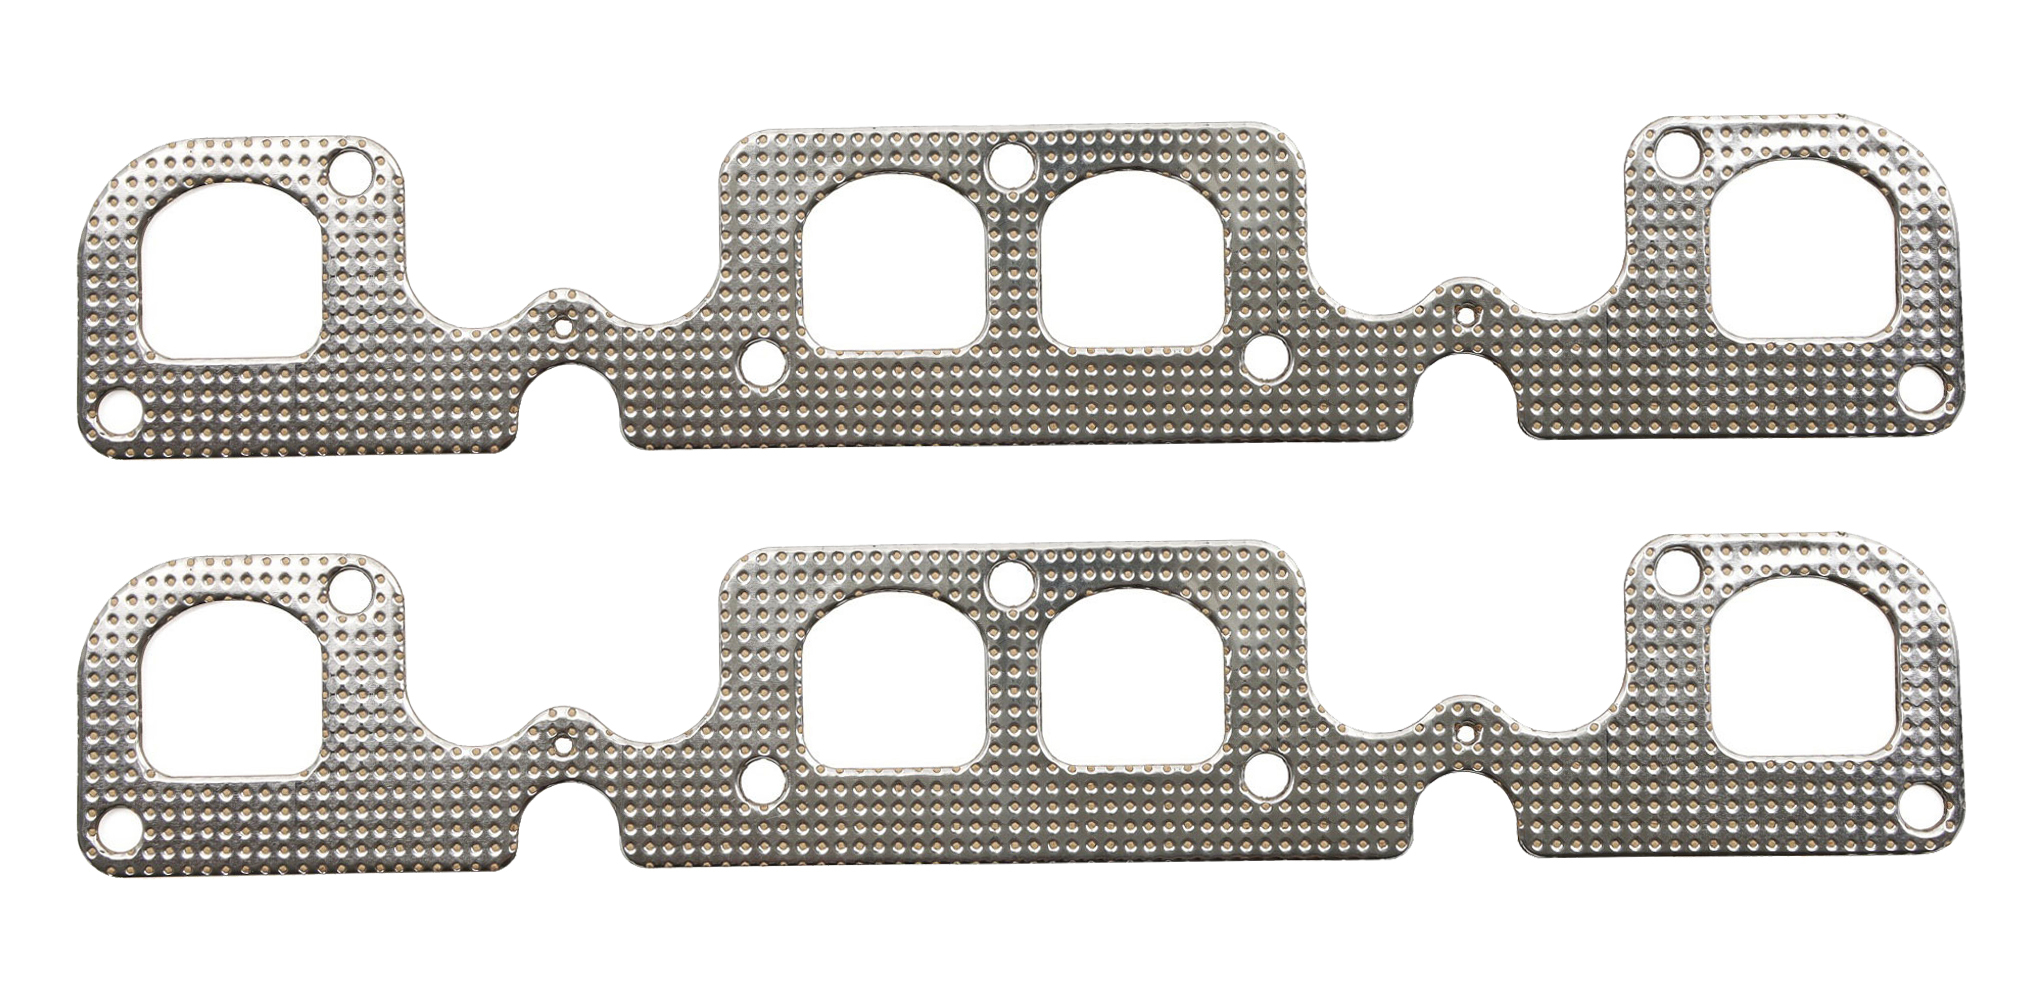 Cometic Gaskets C15603-064 - Exhaust Header/Manifold Gaskets, 1.780 x 1.700 in D Port, Aluminum, Small Block Chevy, Pair